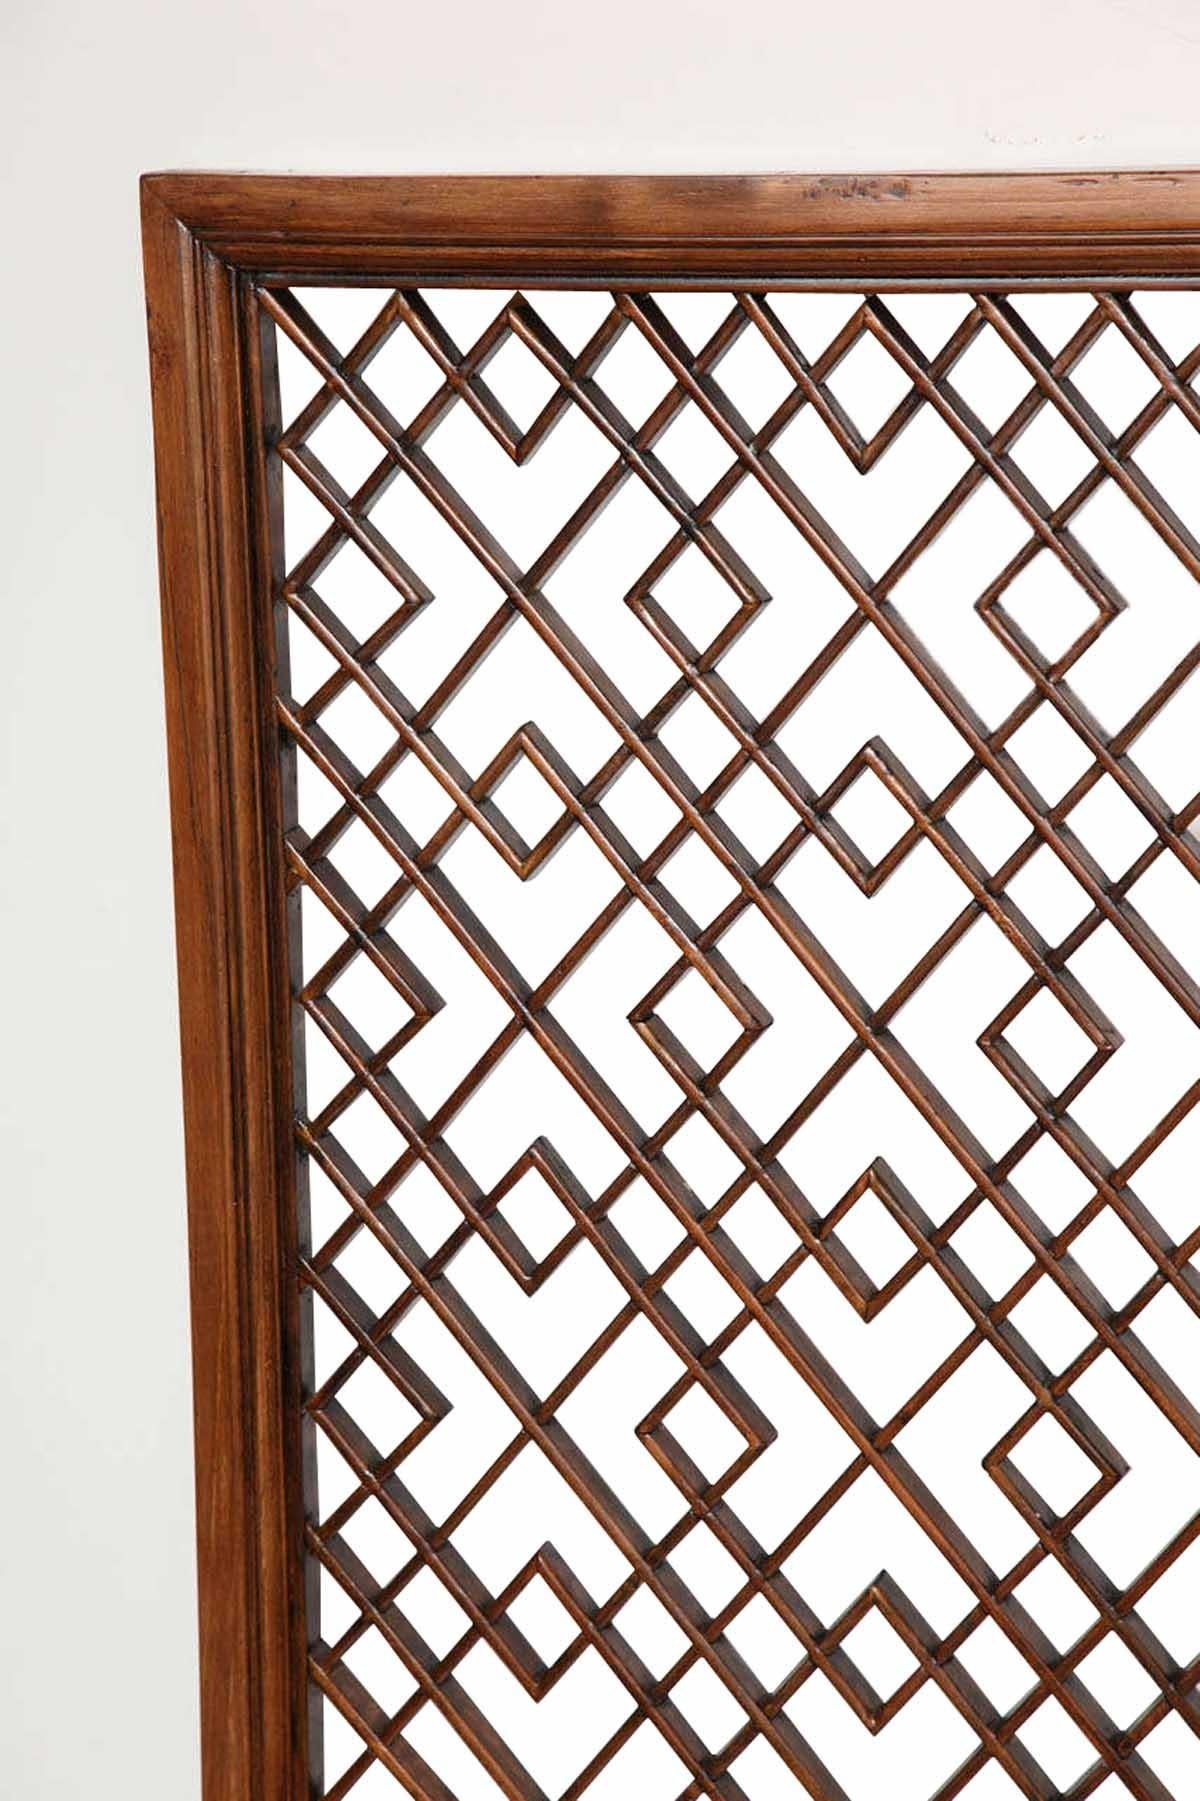 A wood lattice screen or wall panel in a traditional Chinese pattern. Shanghai, circa 1925. Traditional diagonal pattern.